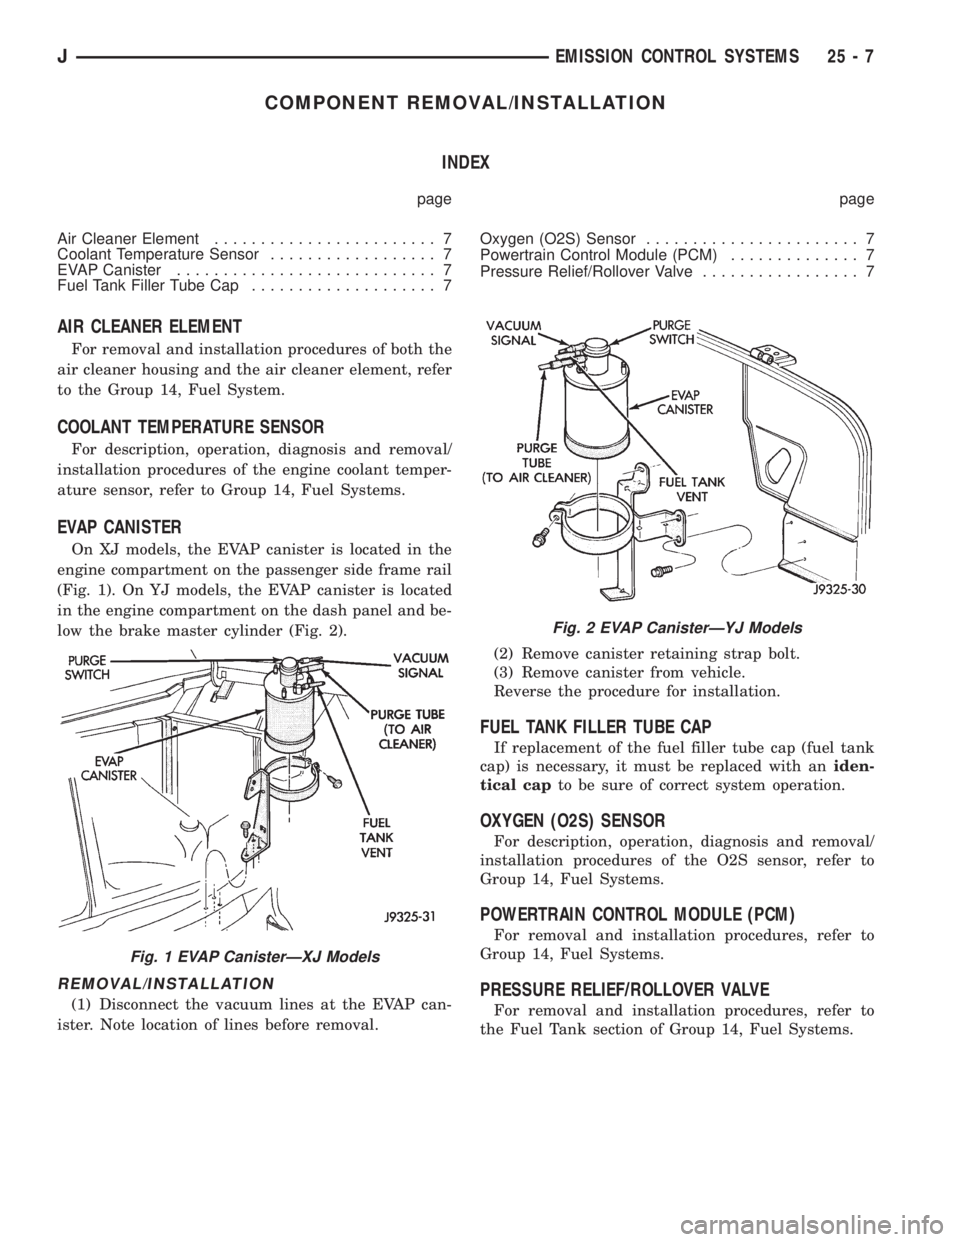 JEEP XJ 1995  Service And Repair Manual COMPONENT REMOVAL/INSTALLATION
INDEX
page page
Air Cleaner Element........................ 7
Coolant Temperature Sensor.................. 7
EVAP Canister............................ 7
Fuel Tank Filler